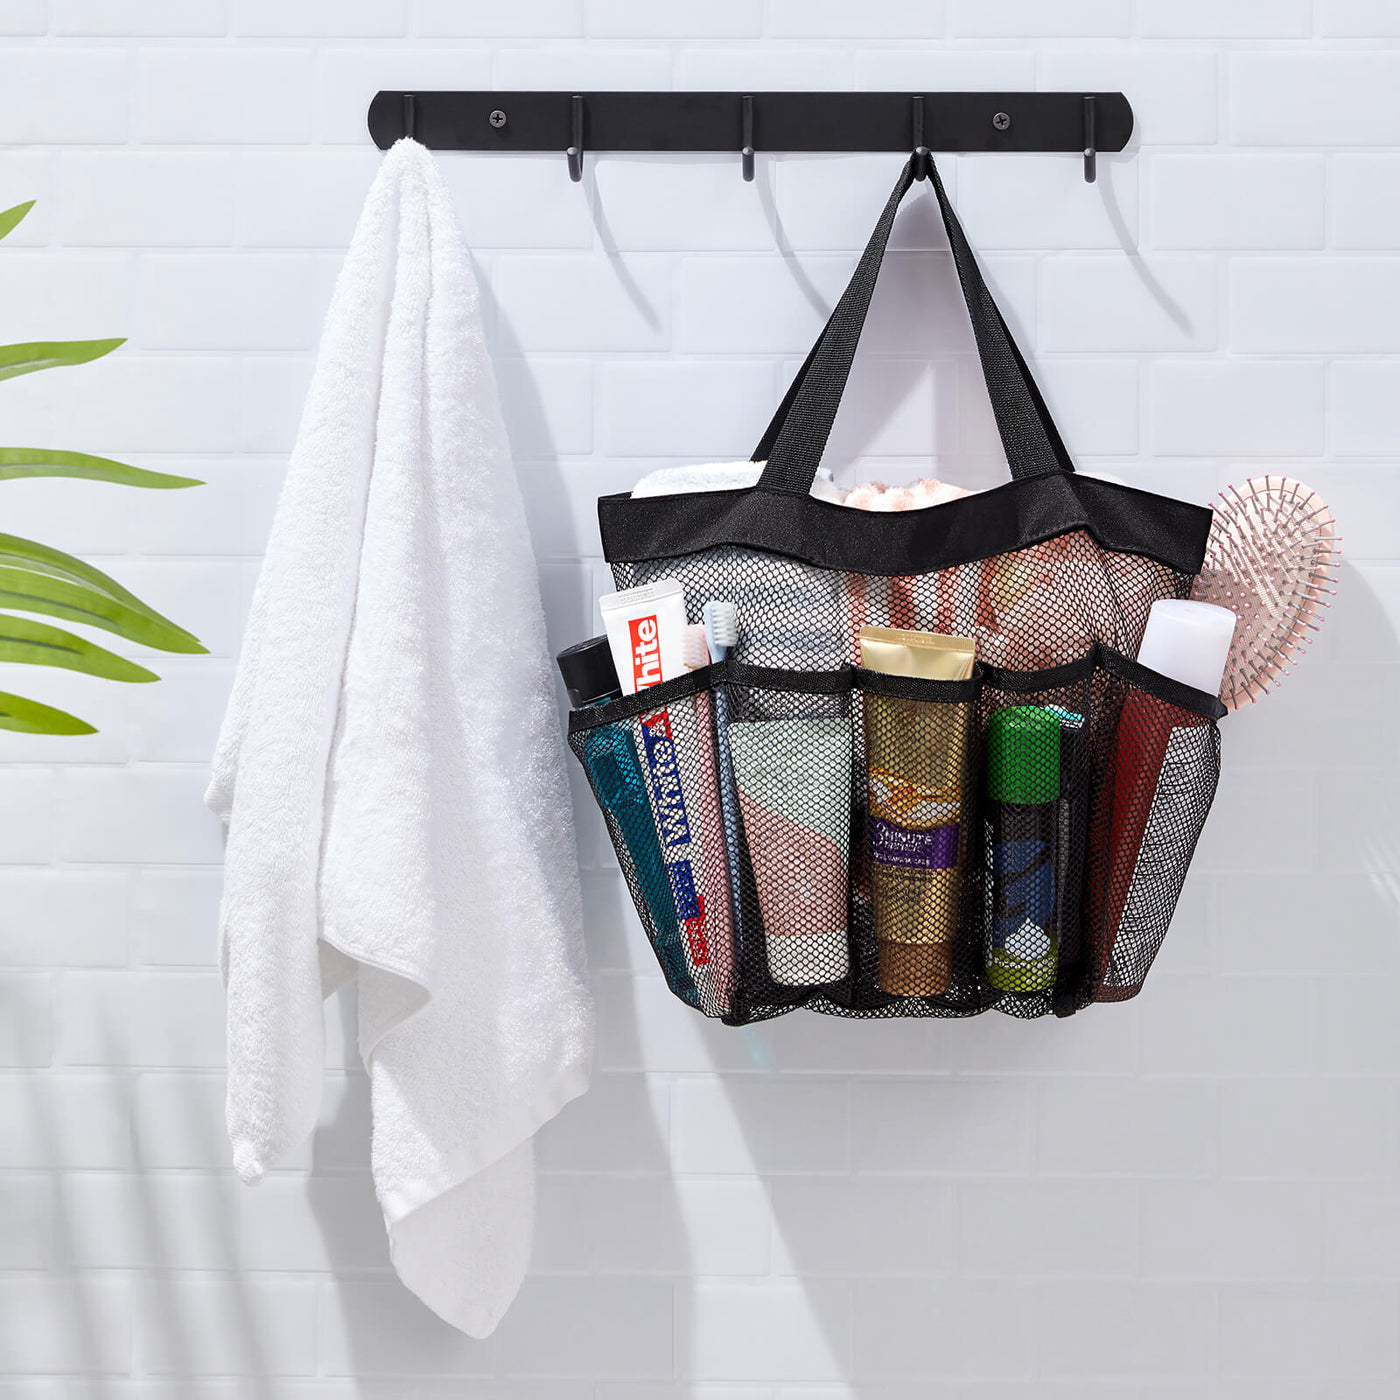 Shower Caddy Bag Portable Hanging Shower Tote Bags with Hook